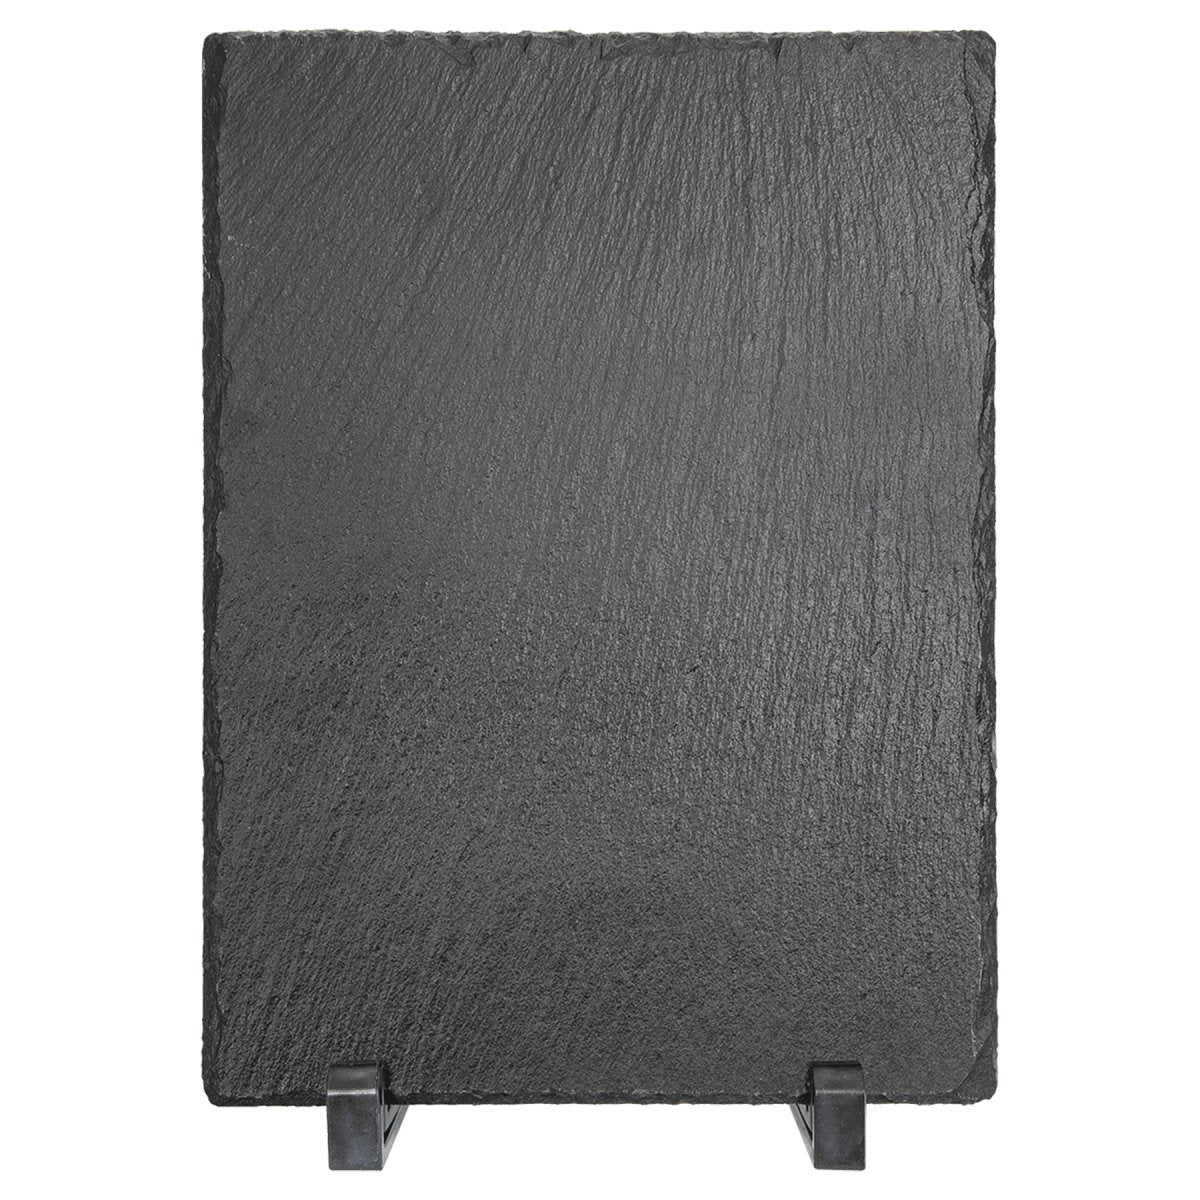 Laserable Slate Decor with Plastic Stands, Rectangle 7" x 5" - Inkfinitee Sublimation